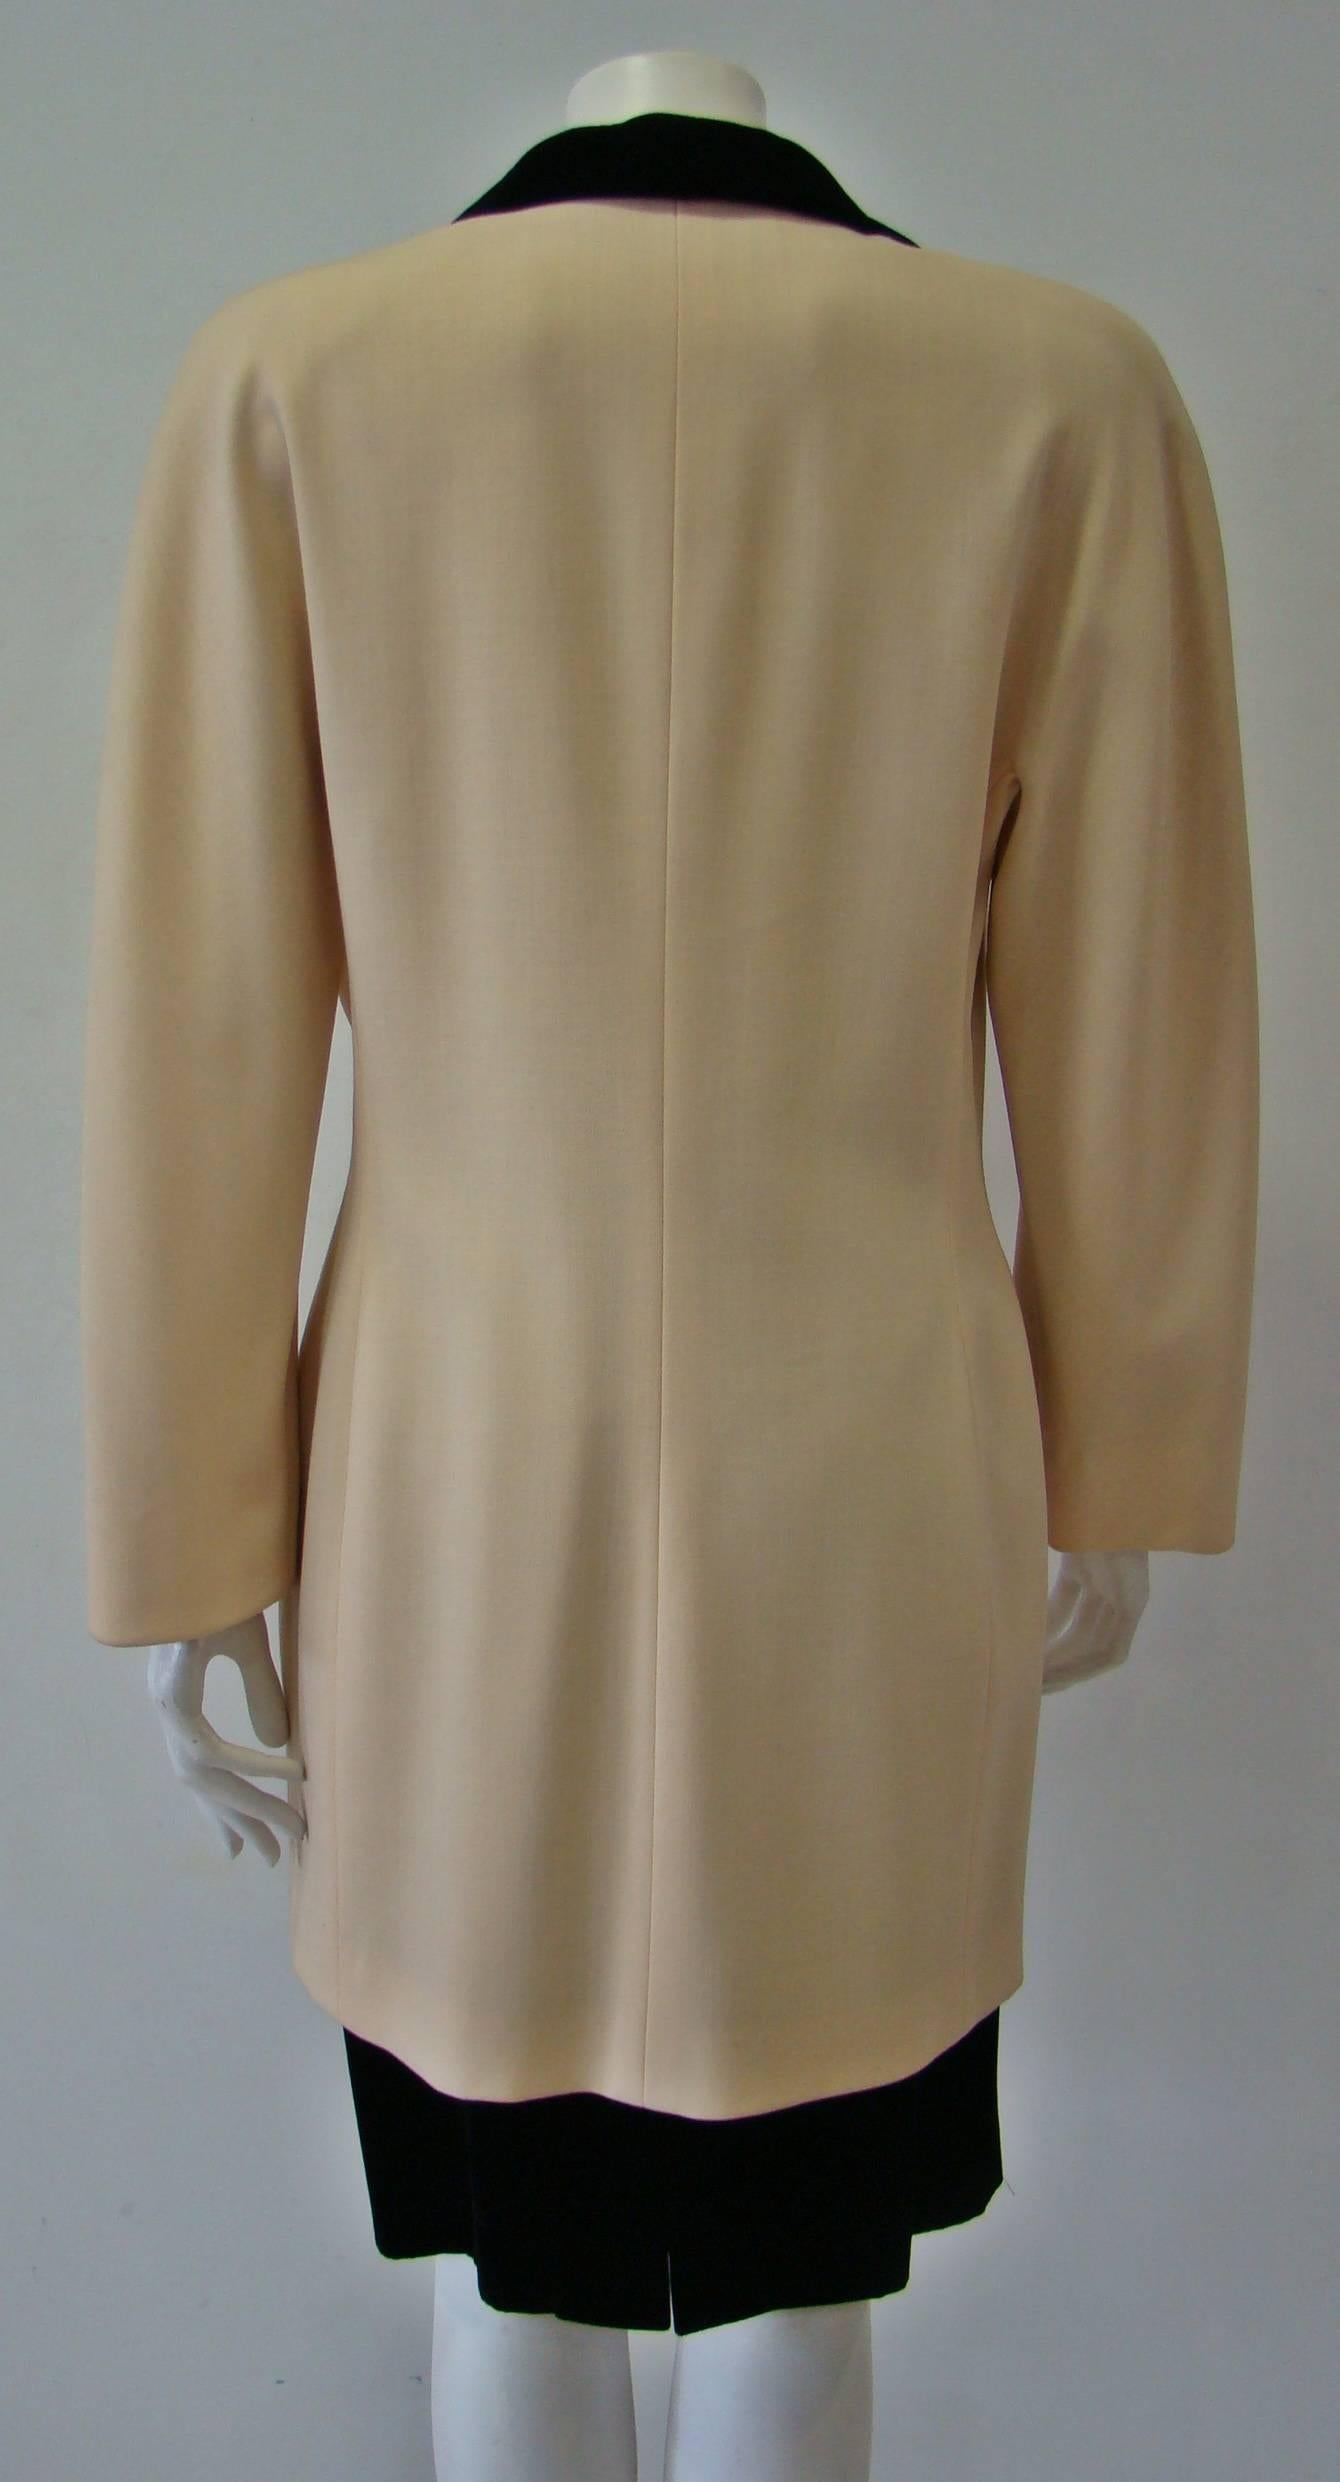 Rare Gianfranco Ferre Evening Tailcoat Skirt Suit For Sale 2